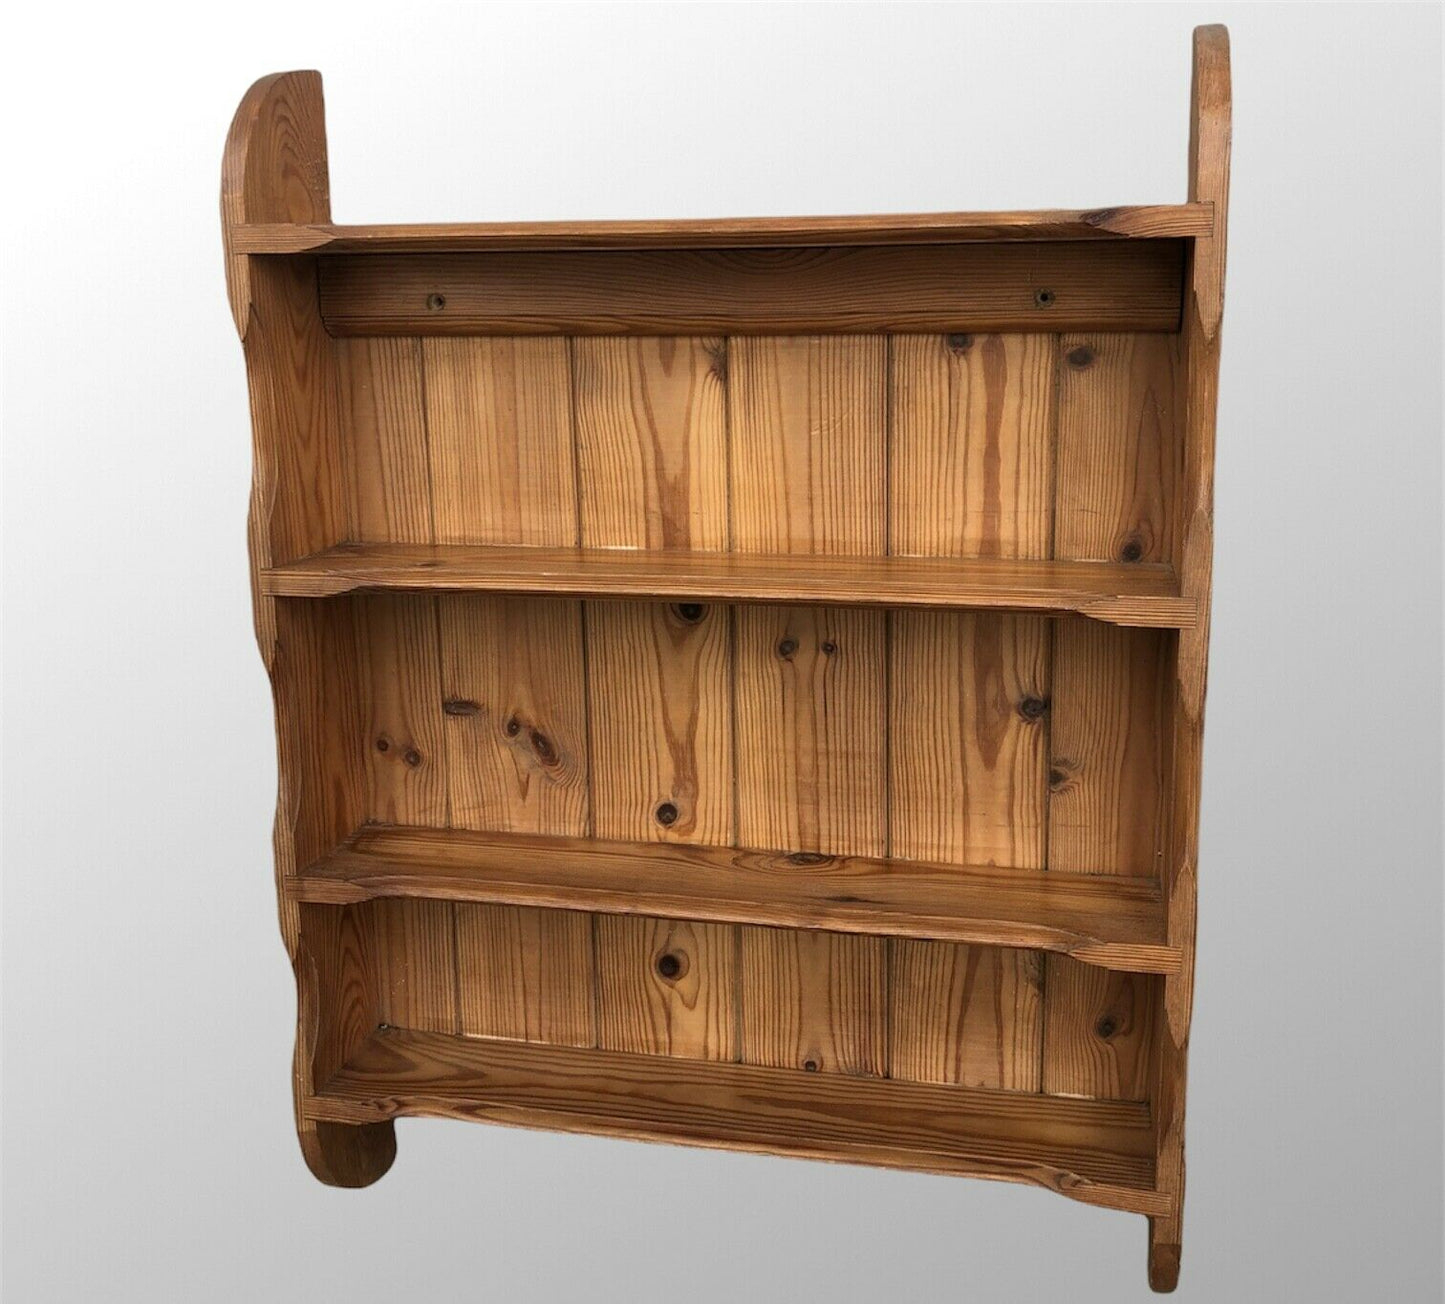 057.....A Set Of Vintage Pine Wall Shelves / Bookcase ( sold )